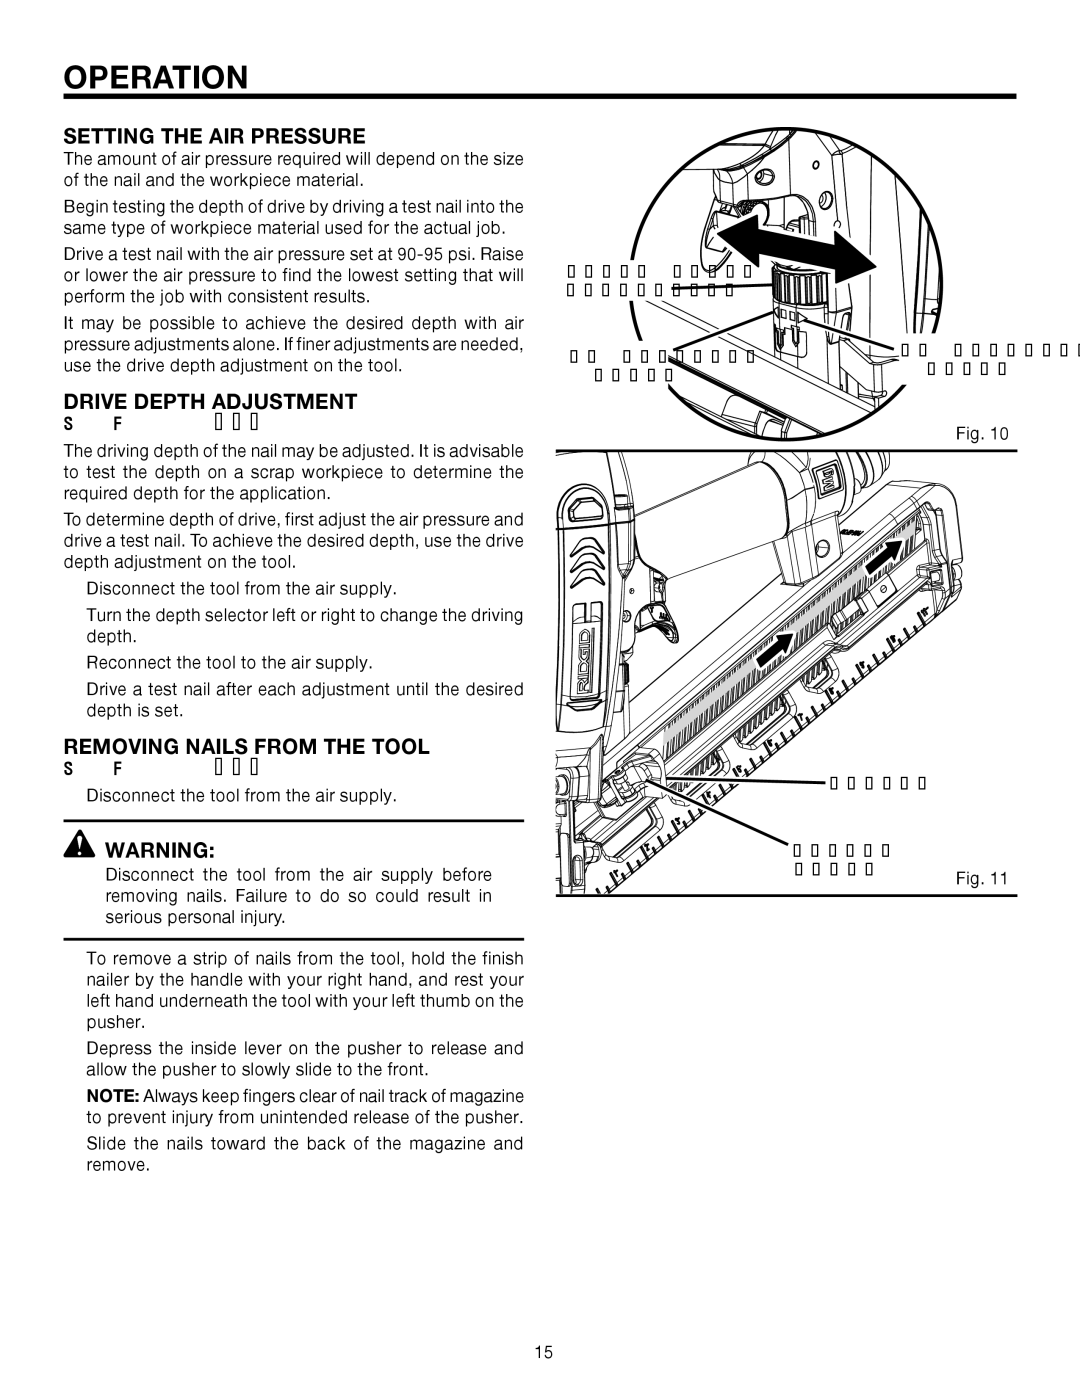 RIDGID R250AFA manual Setting the AIR Pressure, Drive Depth Adjustment, Removing Nails from the Tool 